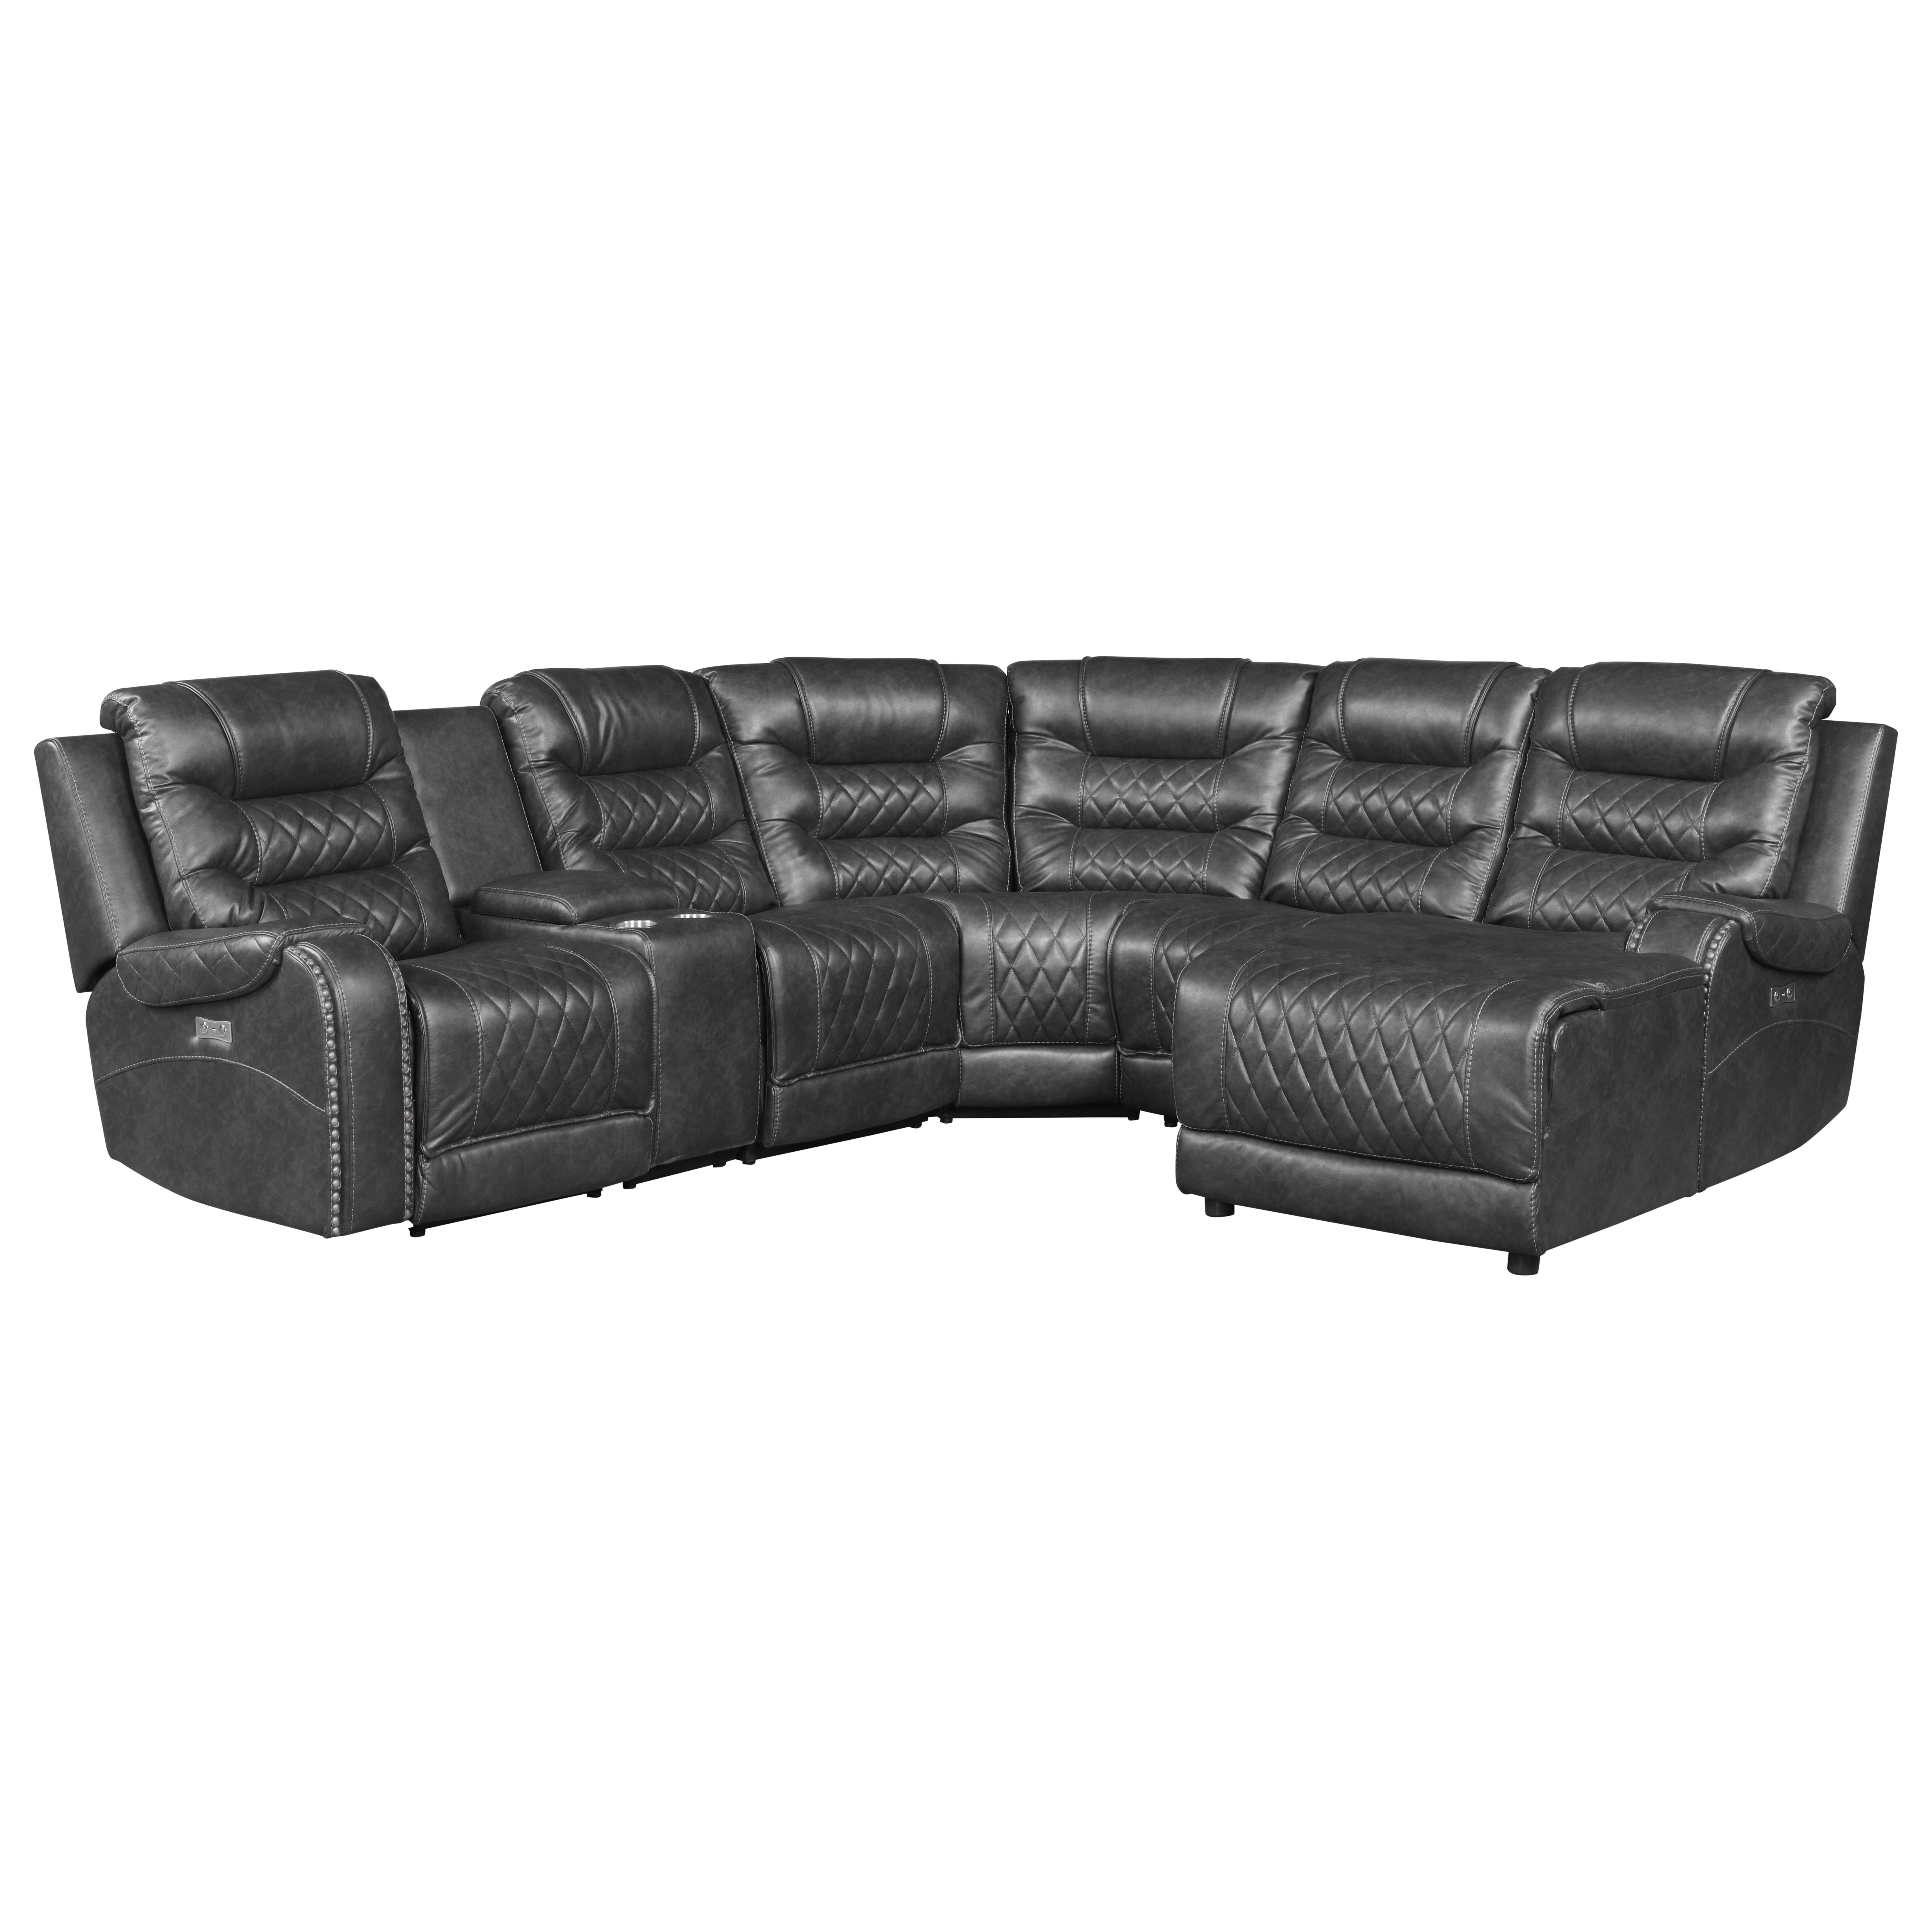 Homelegance 9405GY*6LRRC Putnam Power Reclining Sectional